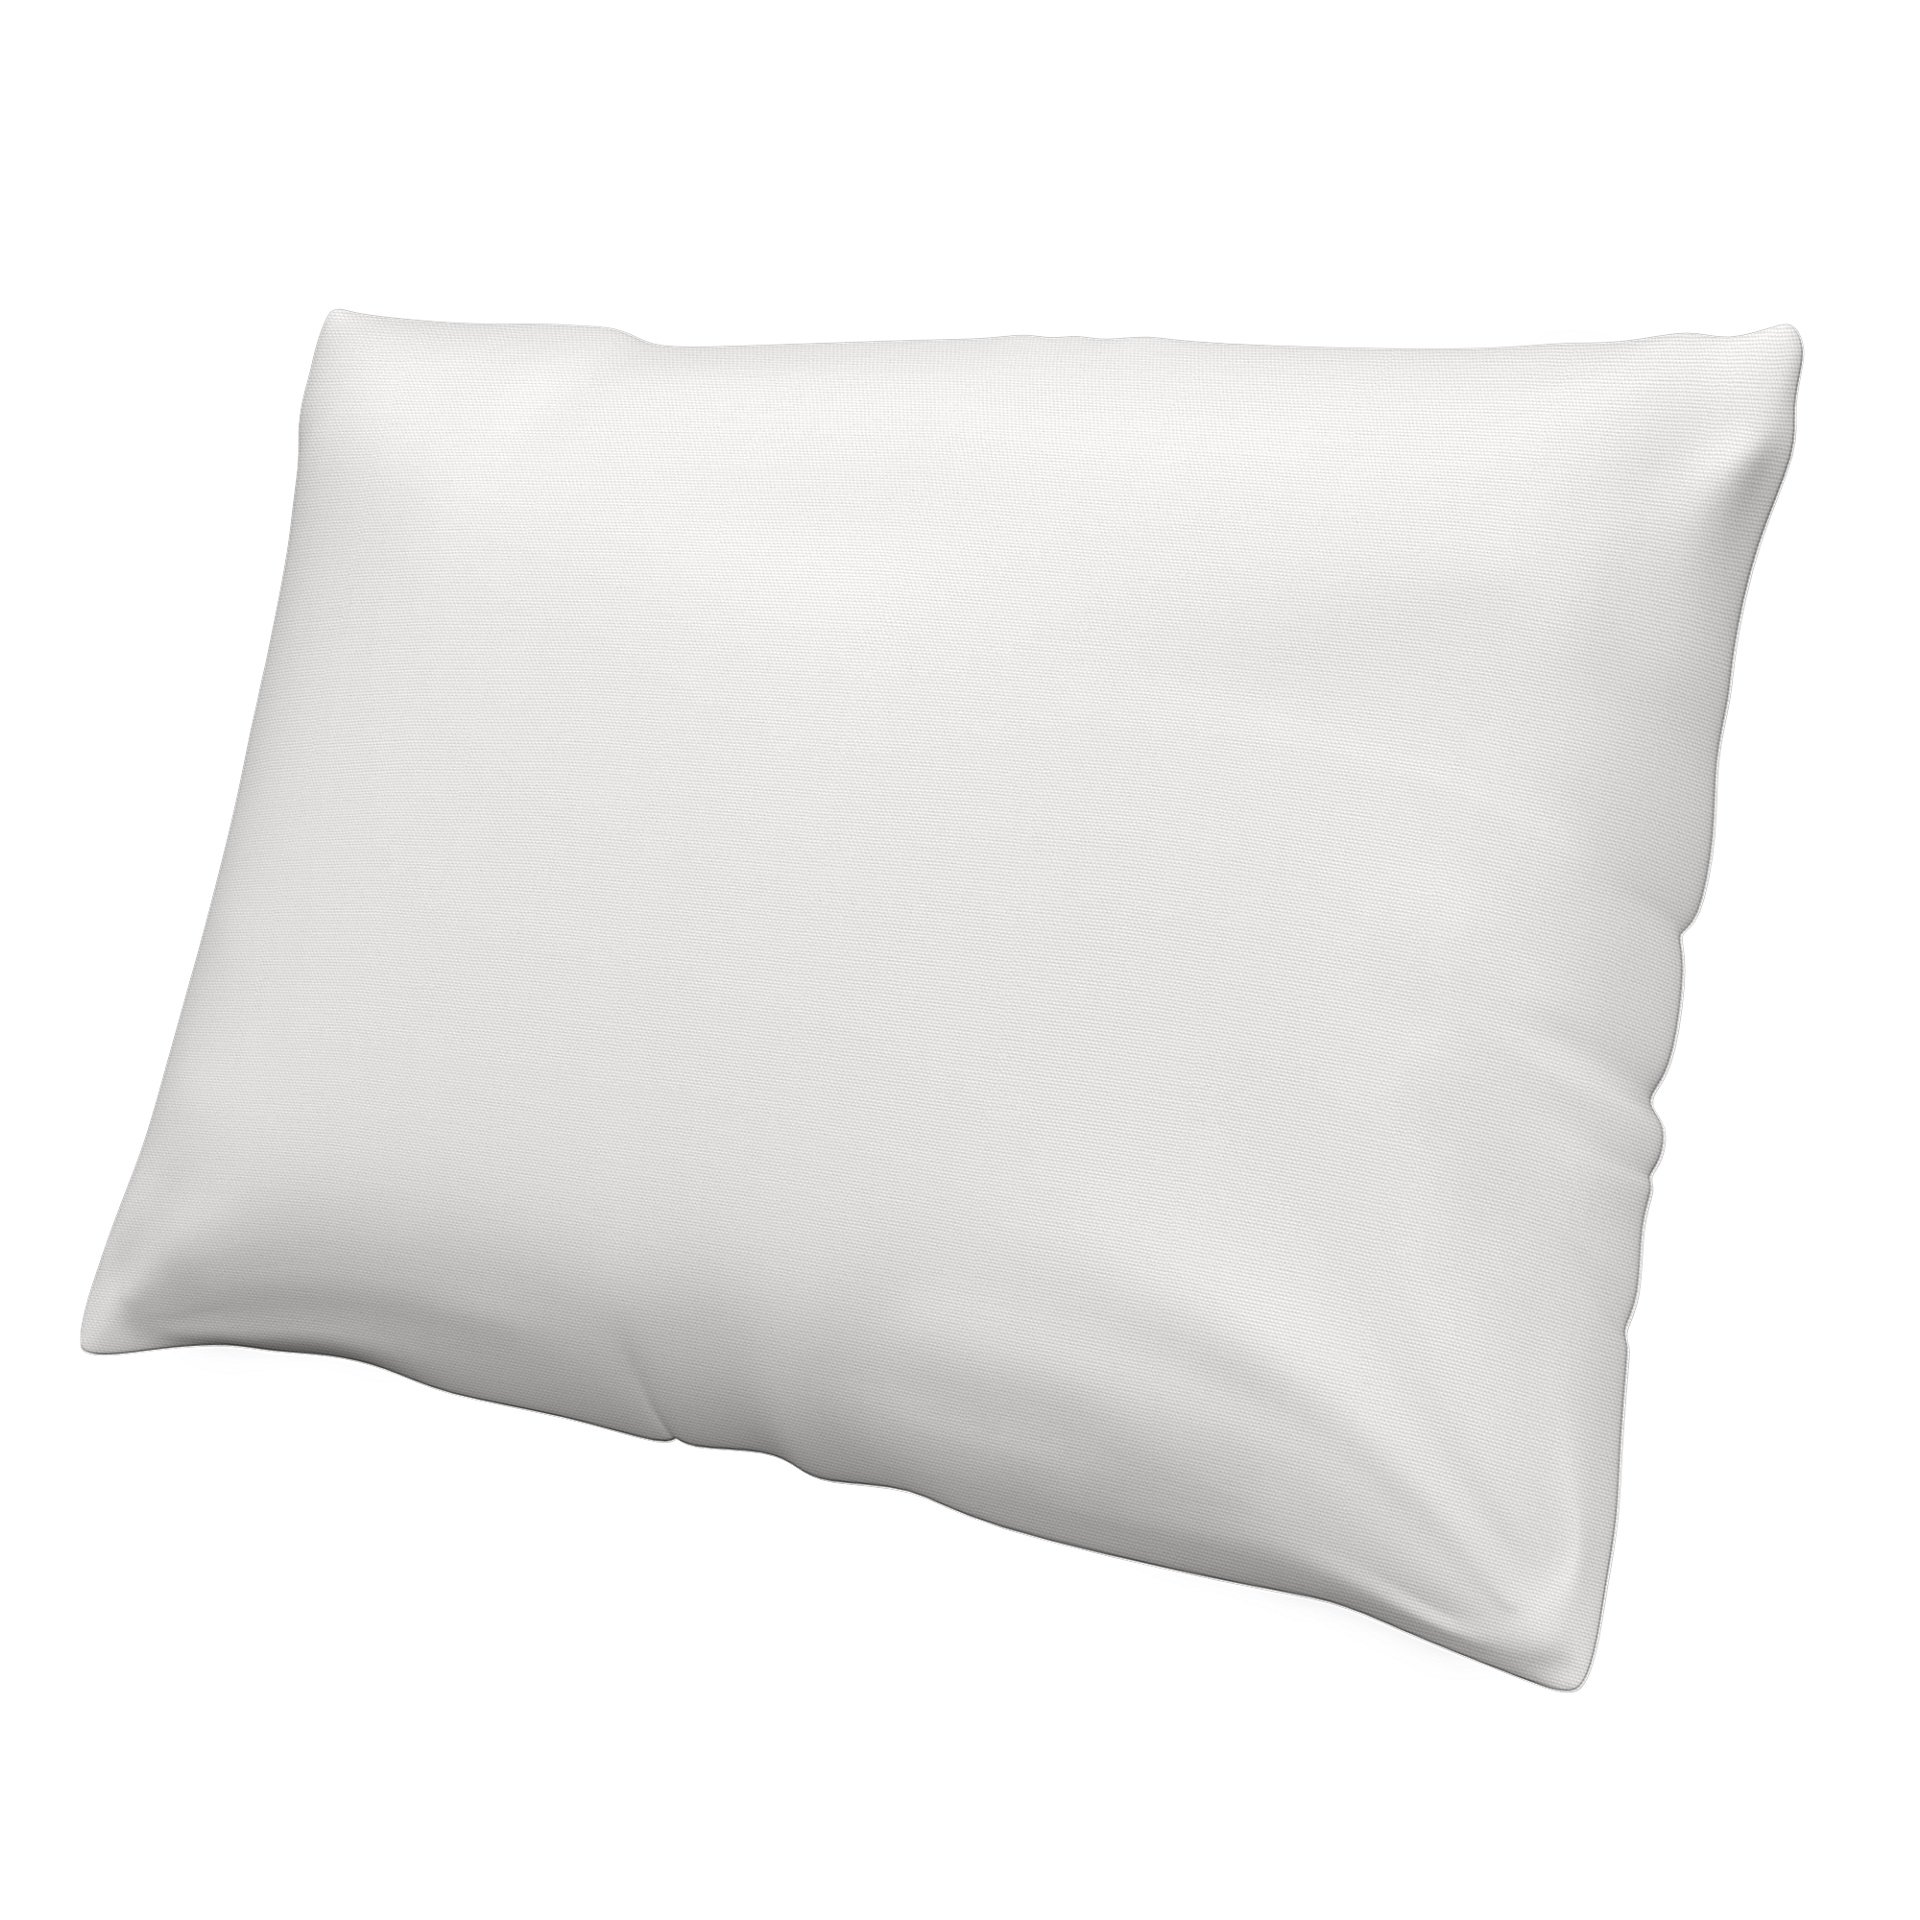 Cushion Cover, Absolute White, Cotton - Bemz